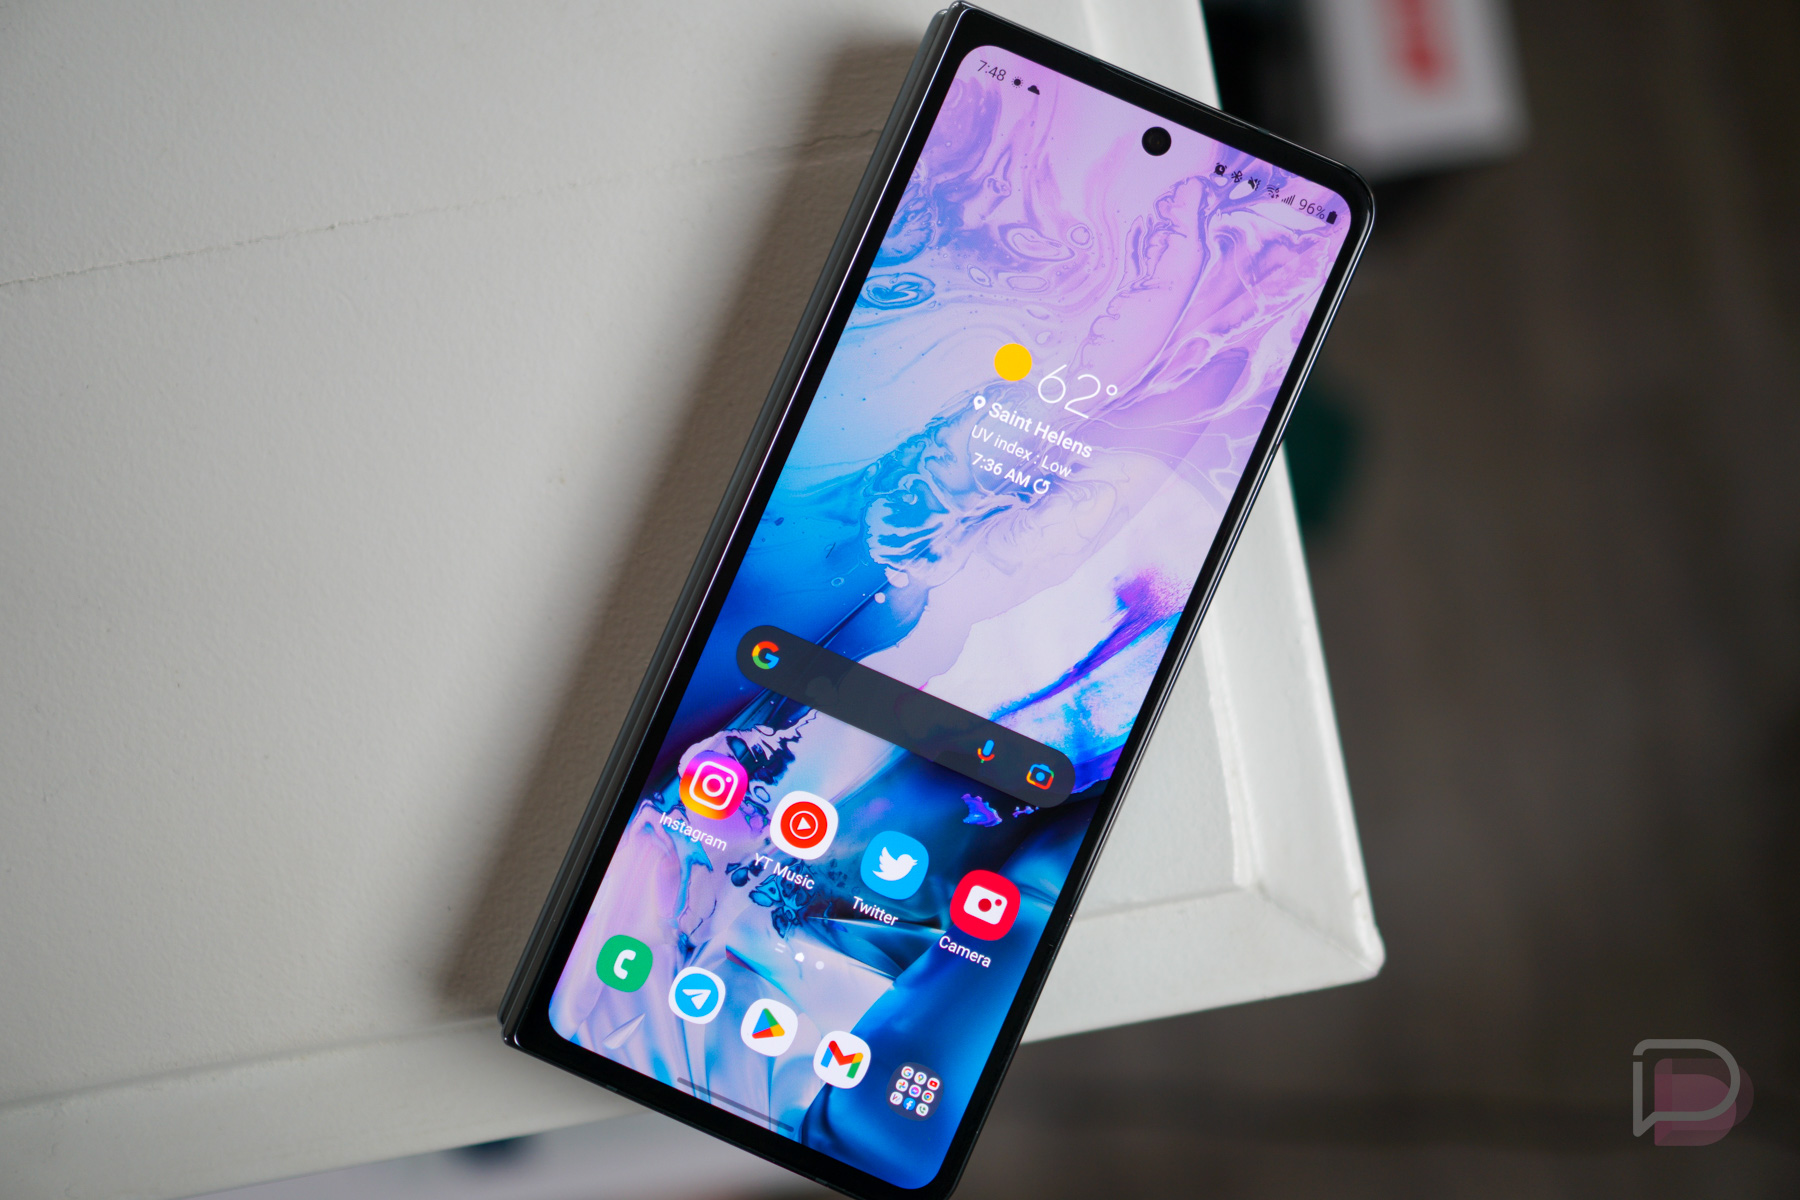 The Galaxy Z Fold 4 is official, brings Android 12L's new taskbar